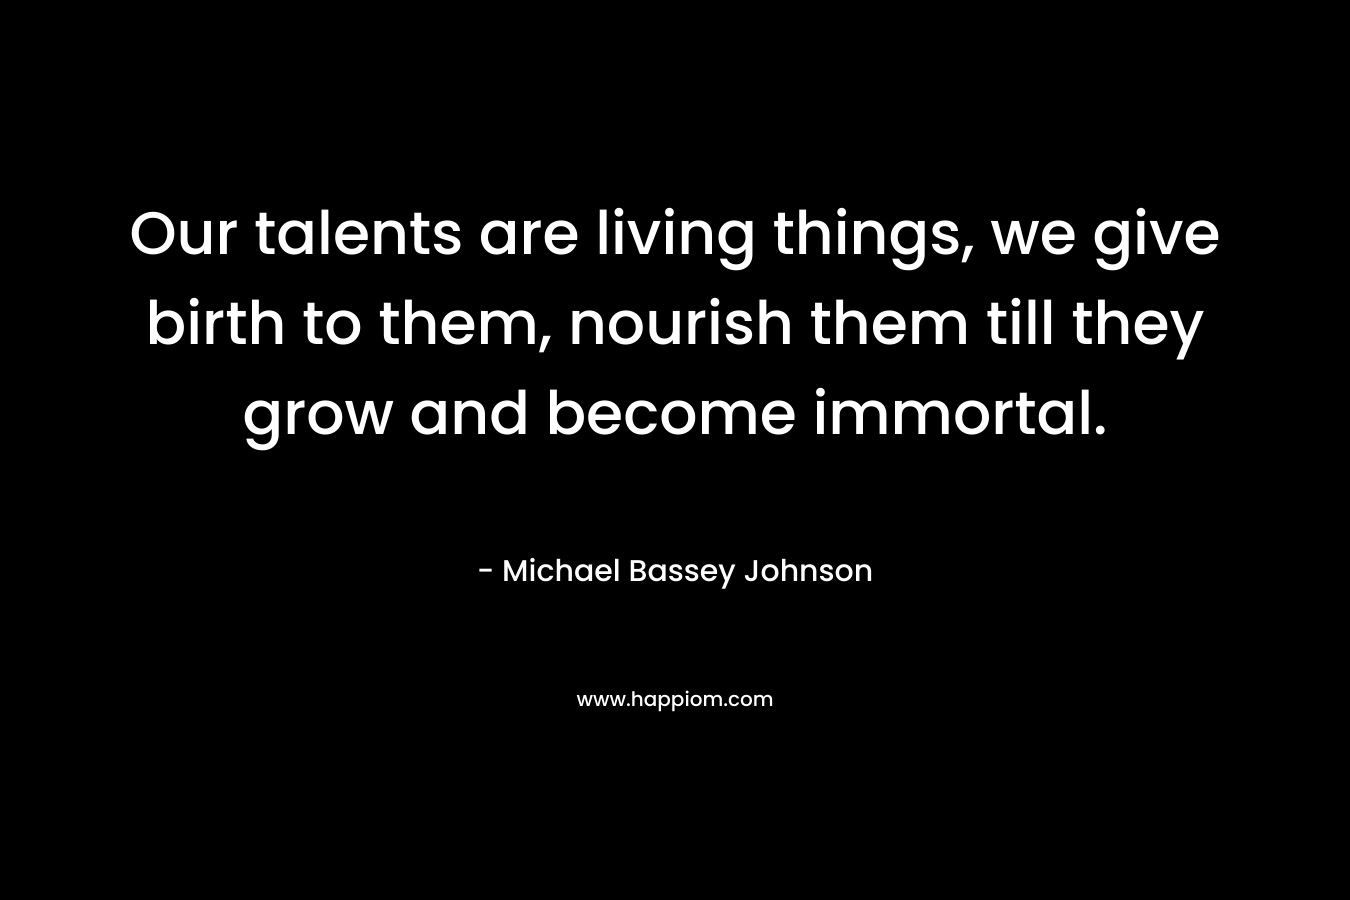 Our talents are living things, we give birth to them, nourish them till they grow and become immortal.